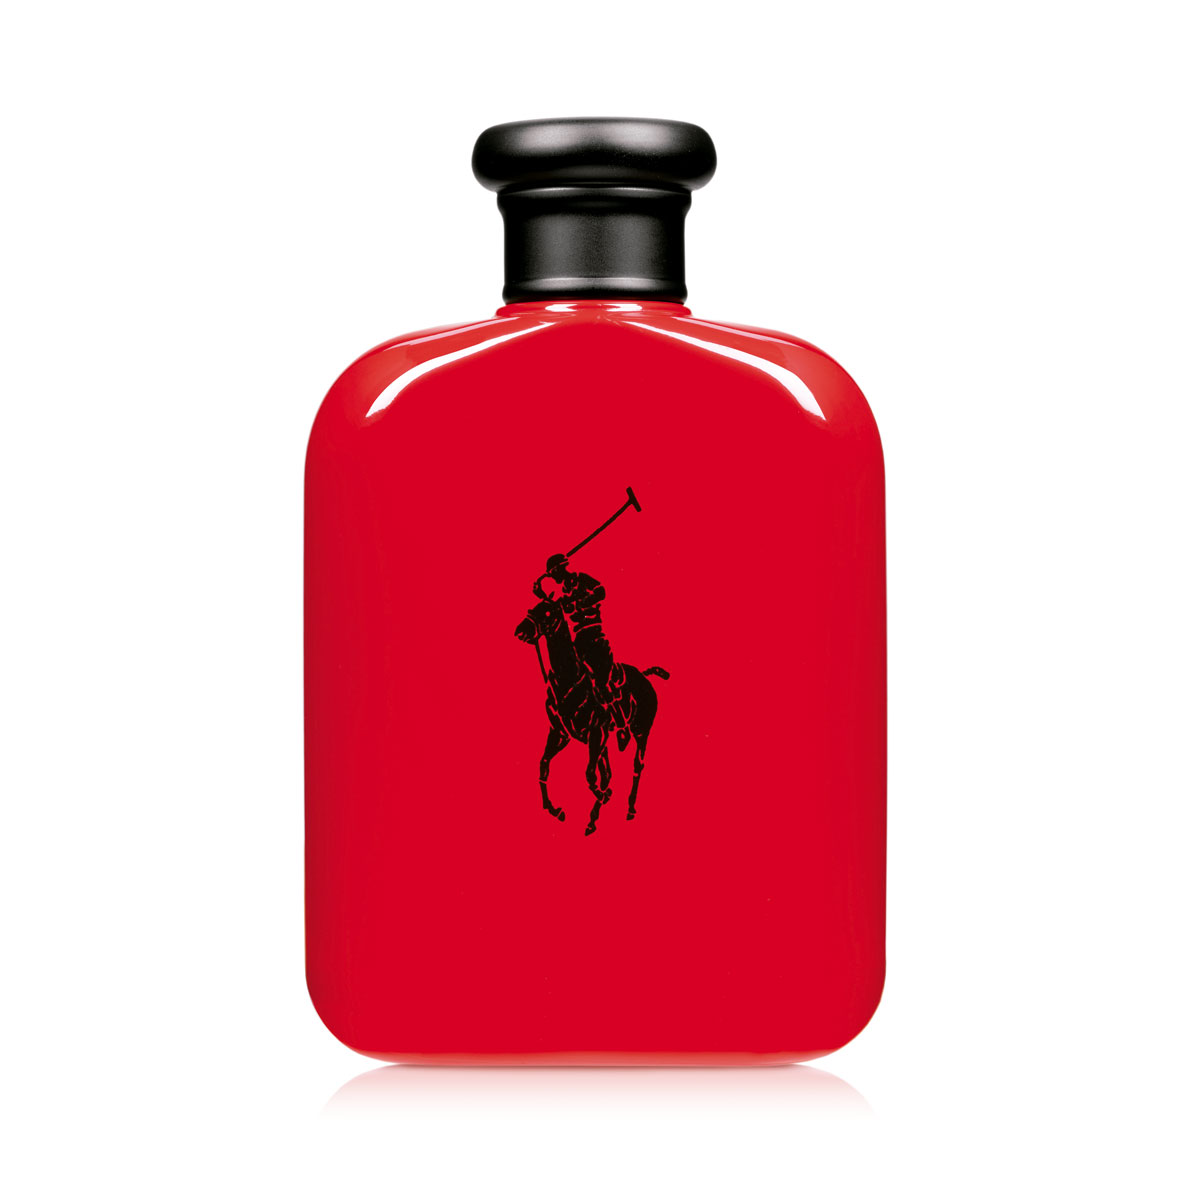 C002765d_polo-red-edt-125ml